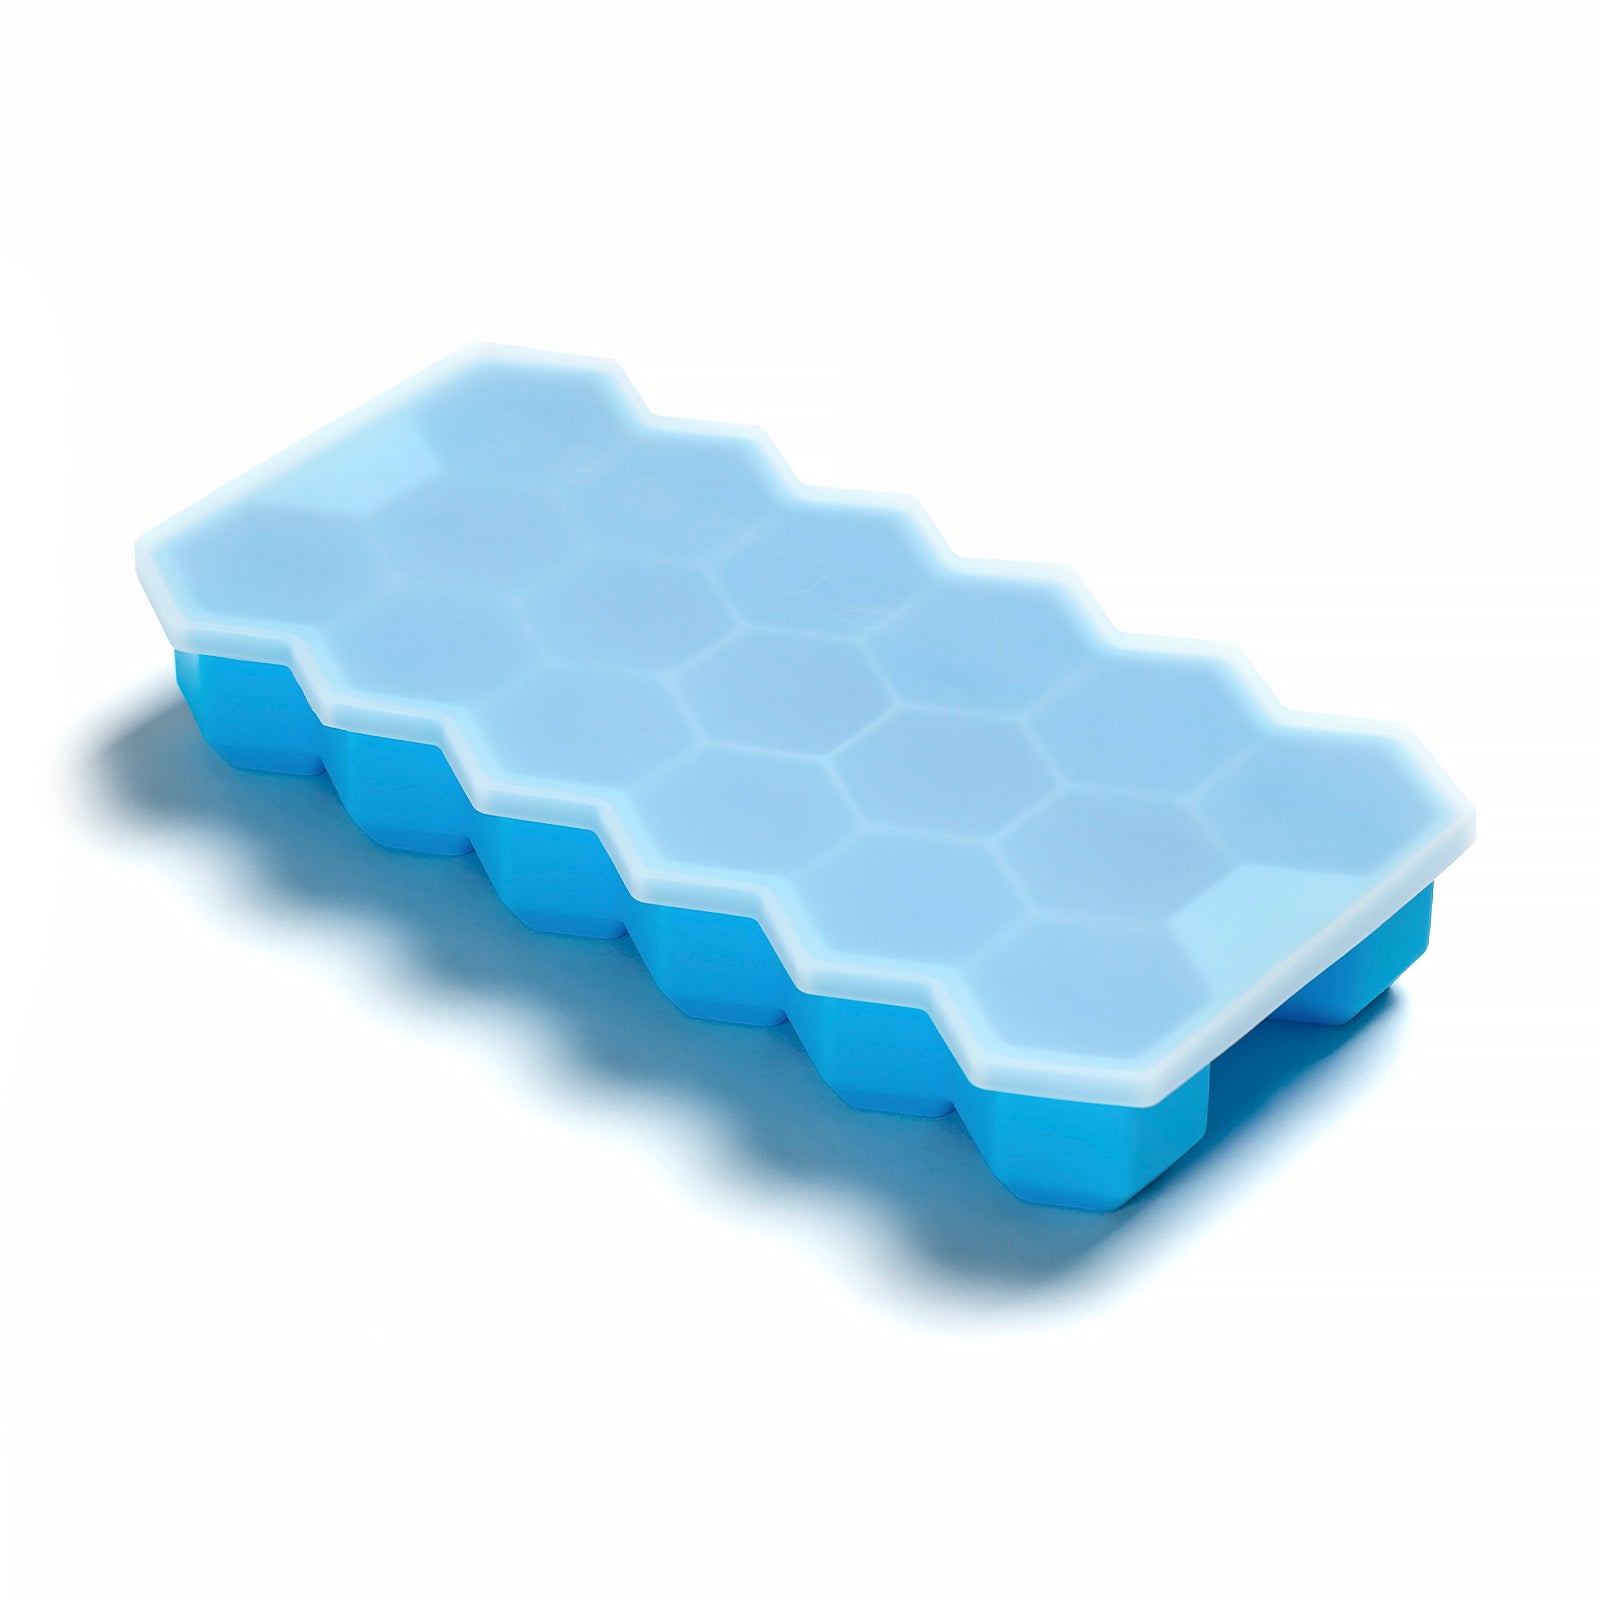 17 Cavities Silicone Ice Tray with Lid